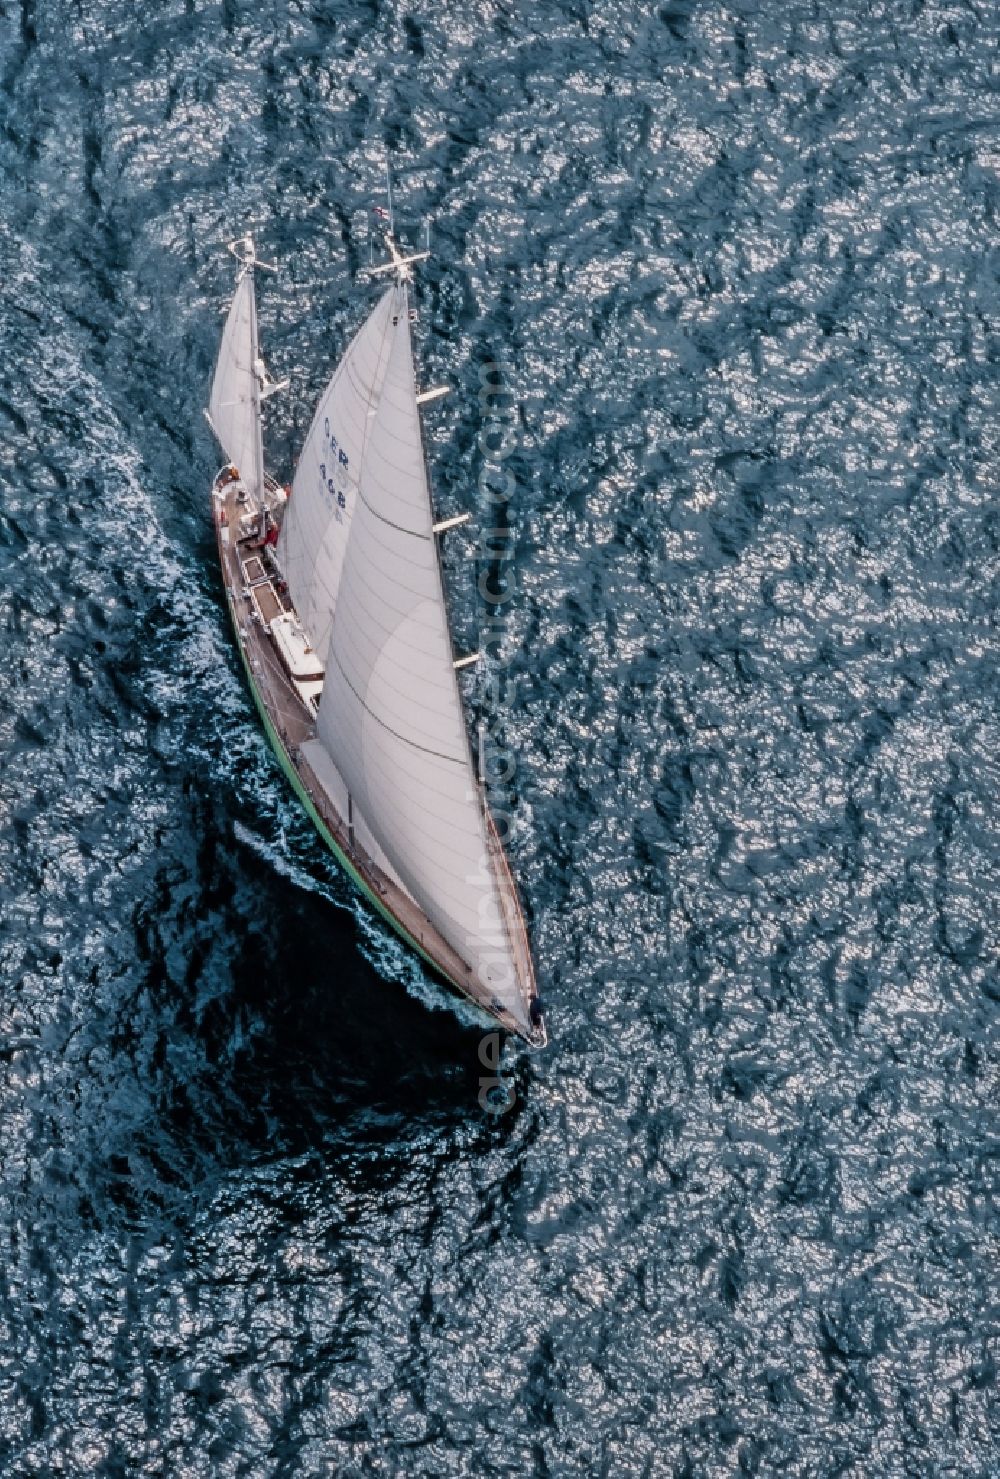 Glücksburg from above - Sailing yacht in motion, GERMANIA VI on the Flensburg Fjord in Gluecksburg in the state Schleswig-Holstein, Germany